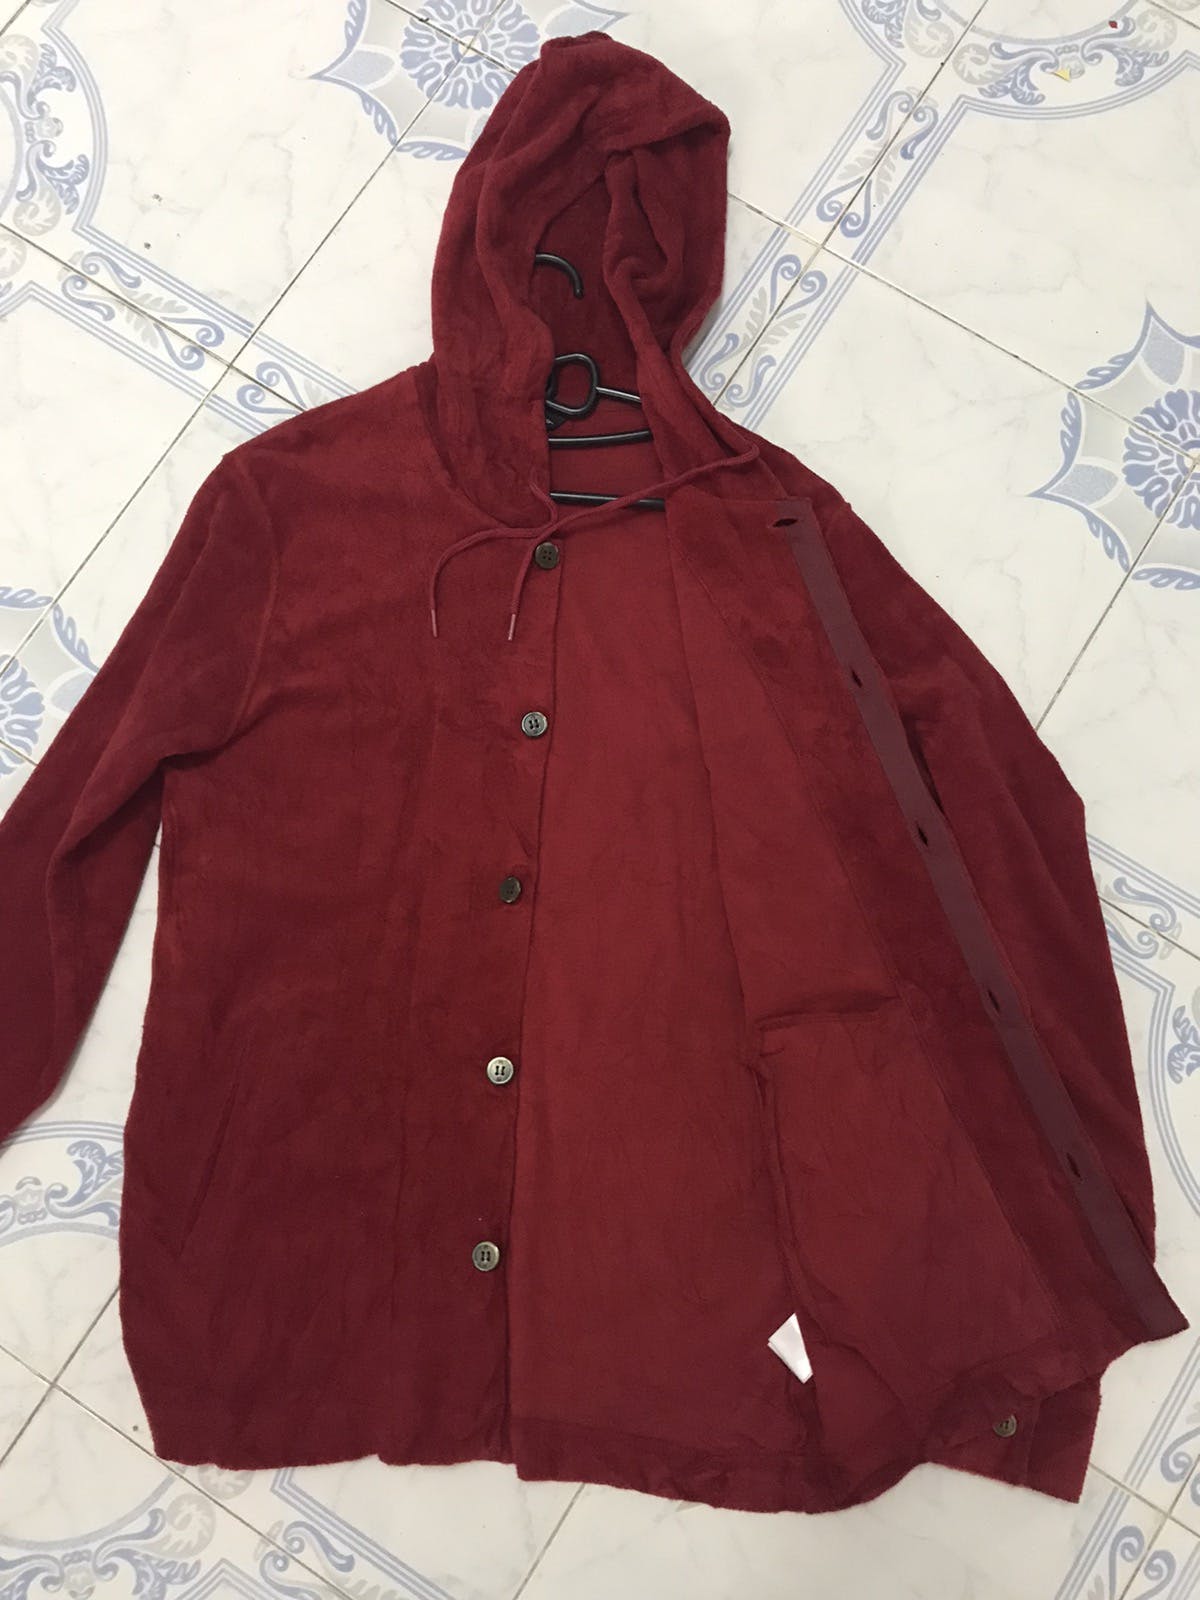 Paul Smith Button Up Hoodie Jacket Made in Japan - 15